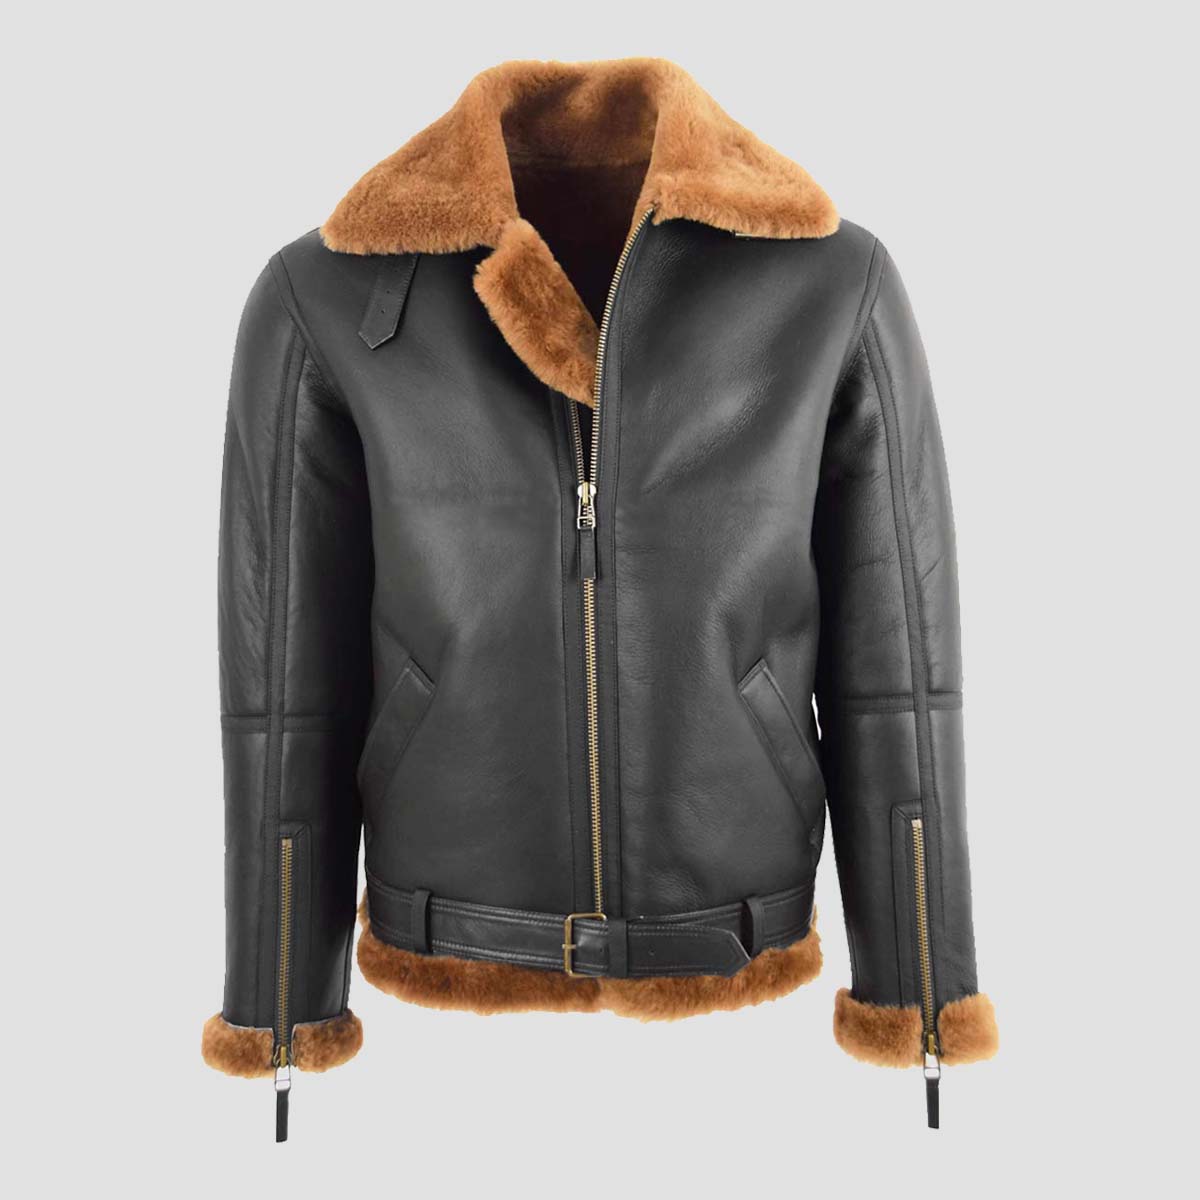 Quilted B-3 Brown Leather Bomber Jacket - The Vintage Leather